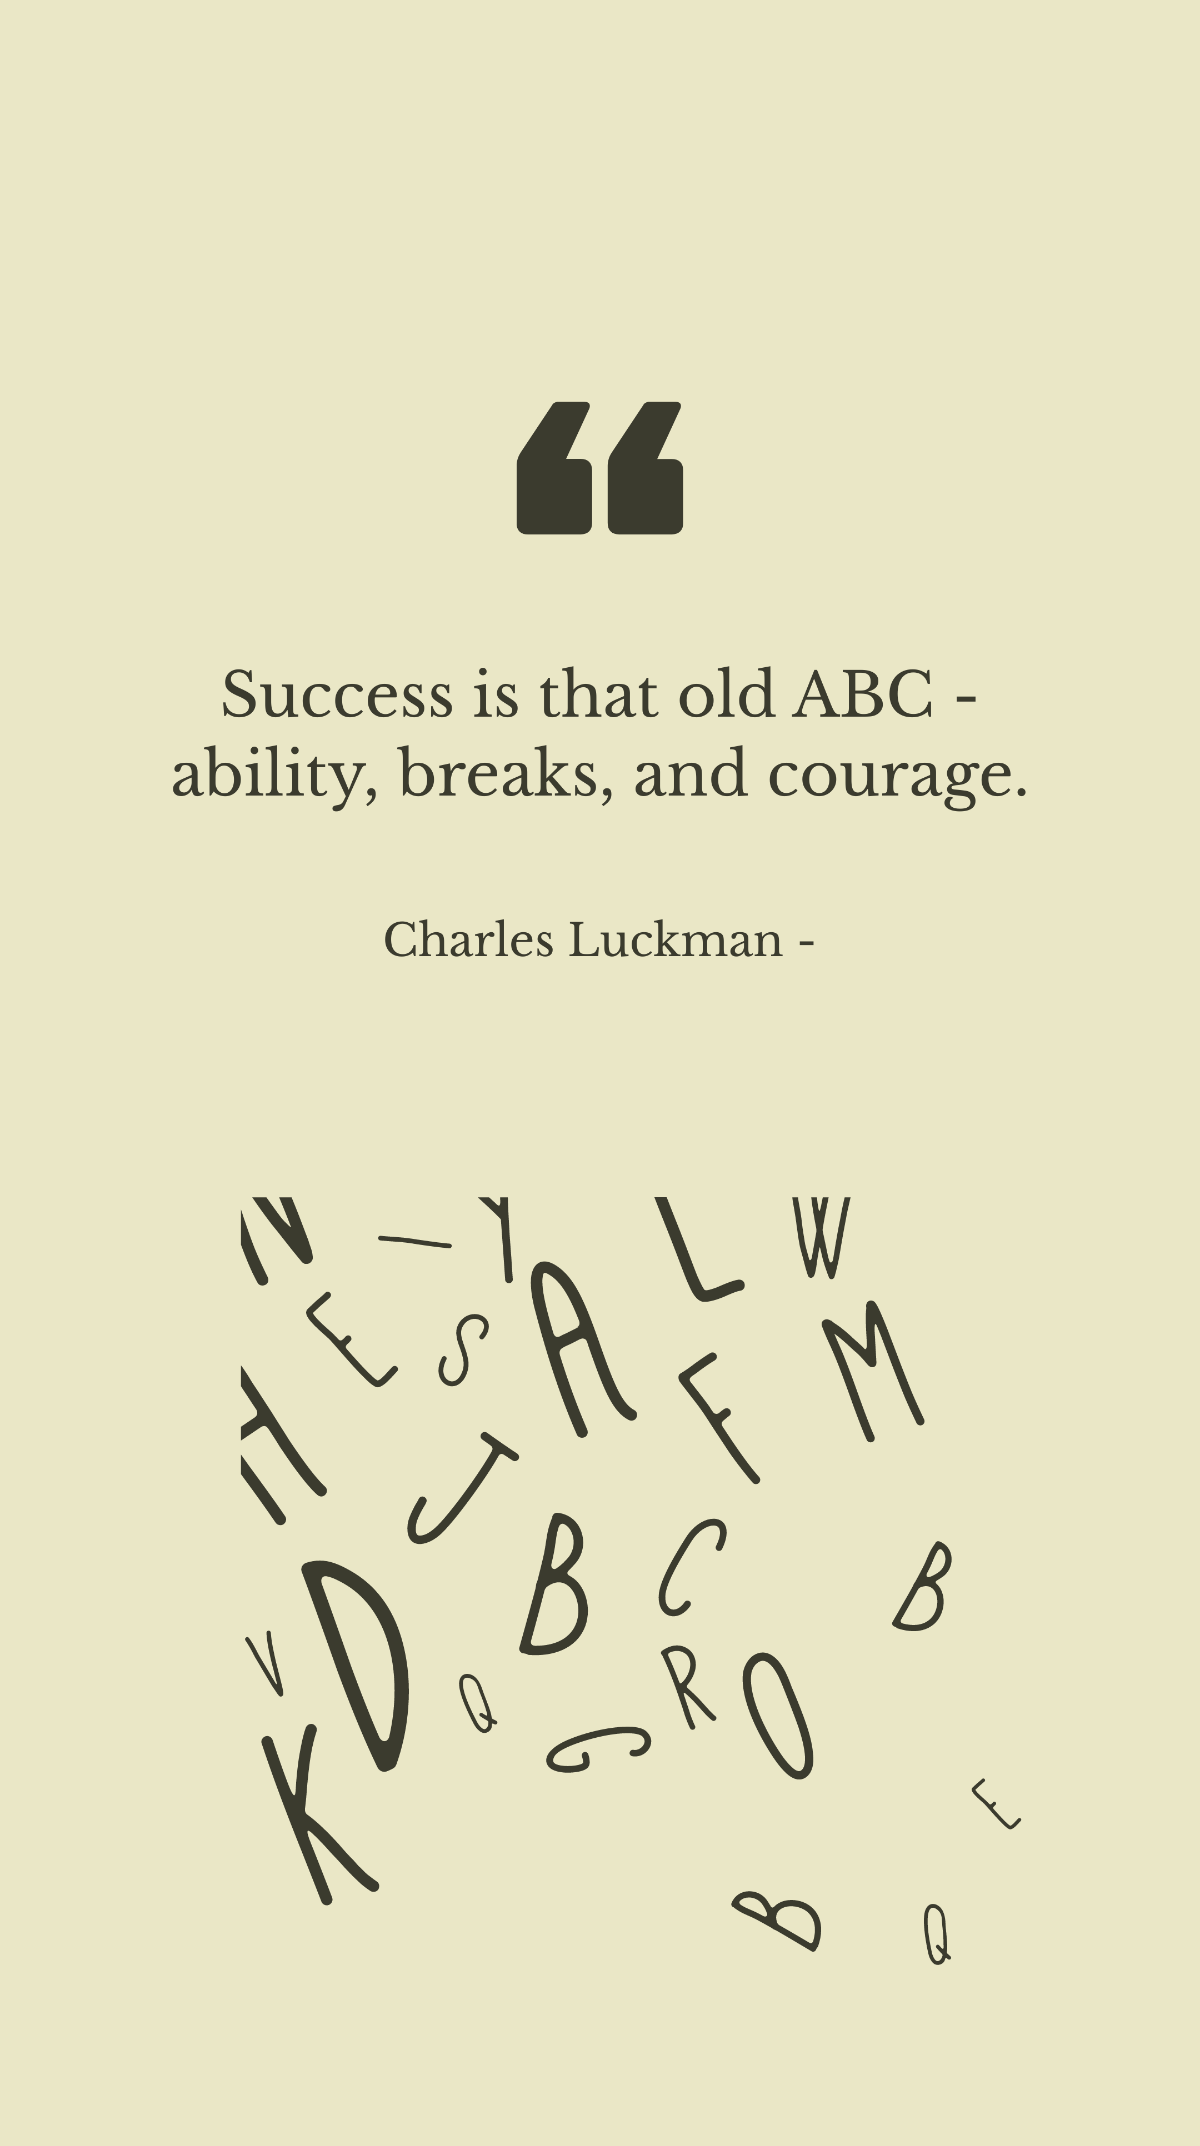 Charles Luckman - Success is that old ABC - ability, breaks, and courage. Template